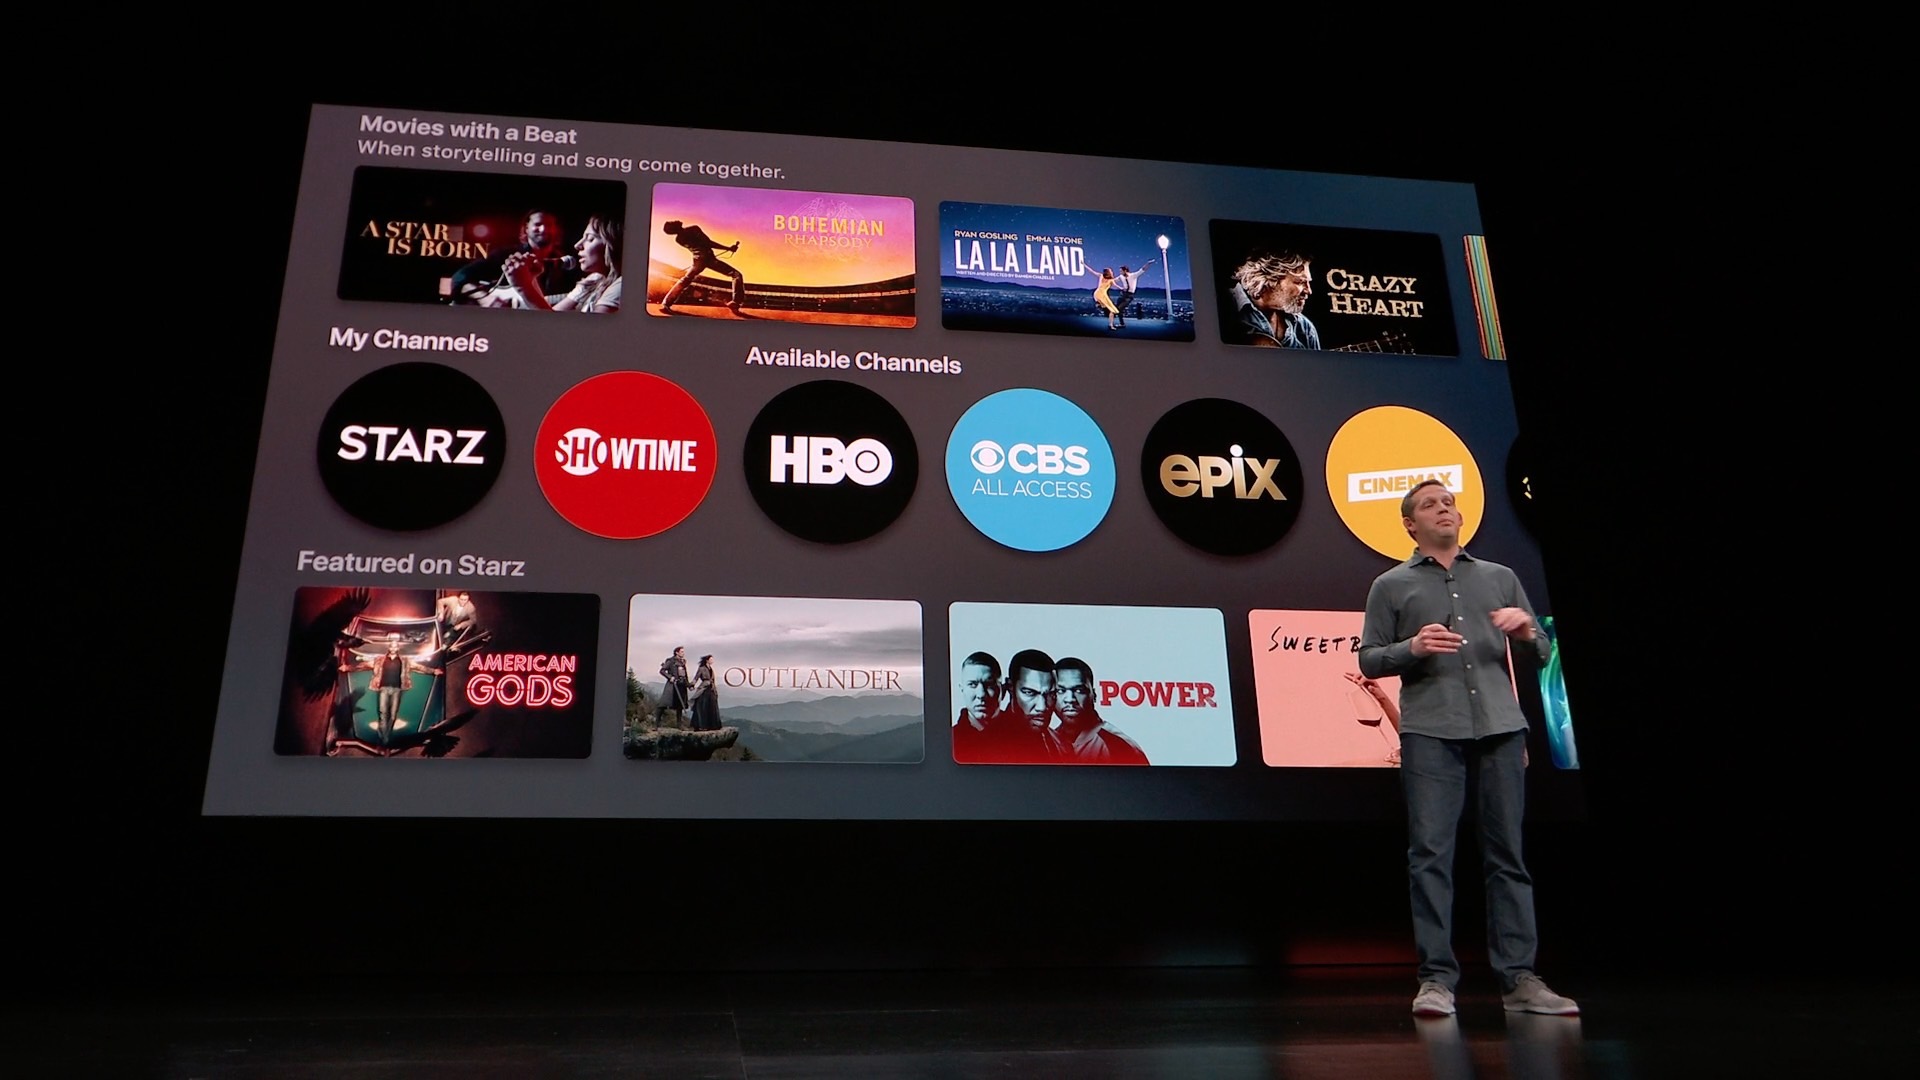 Where & How to Watch Game of Thrones Online or on Apple TV (Season 7!)